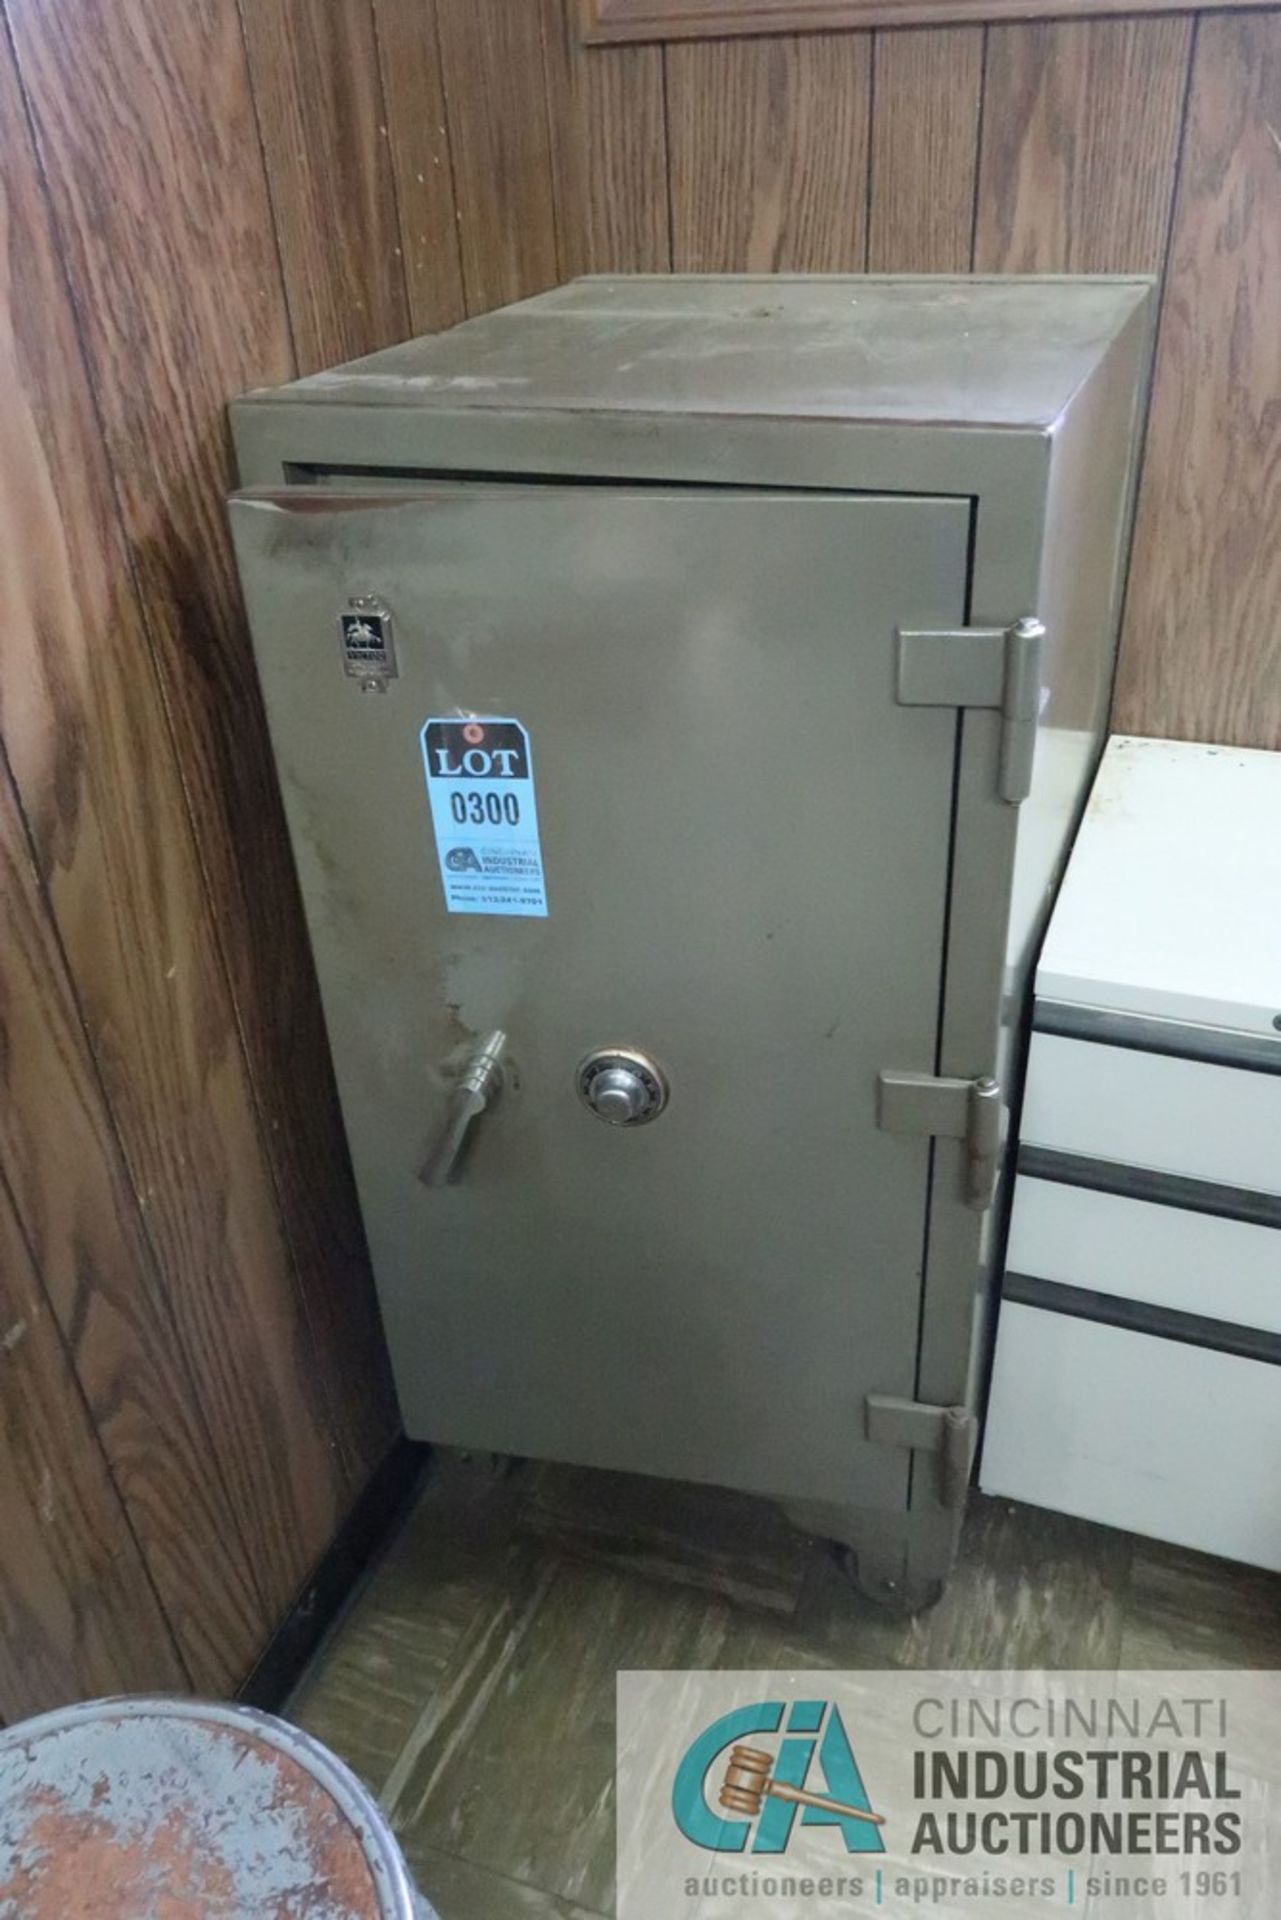 22" X 25" X 45" VICTOR PORTABLE COMBINATION SAFE